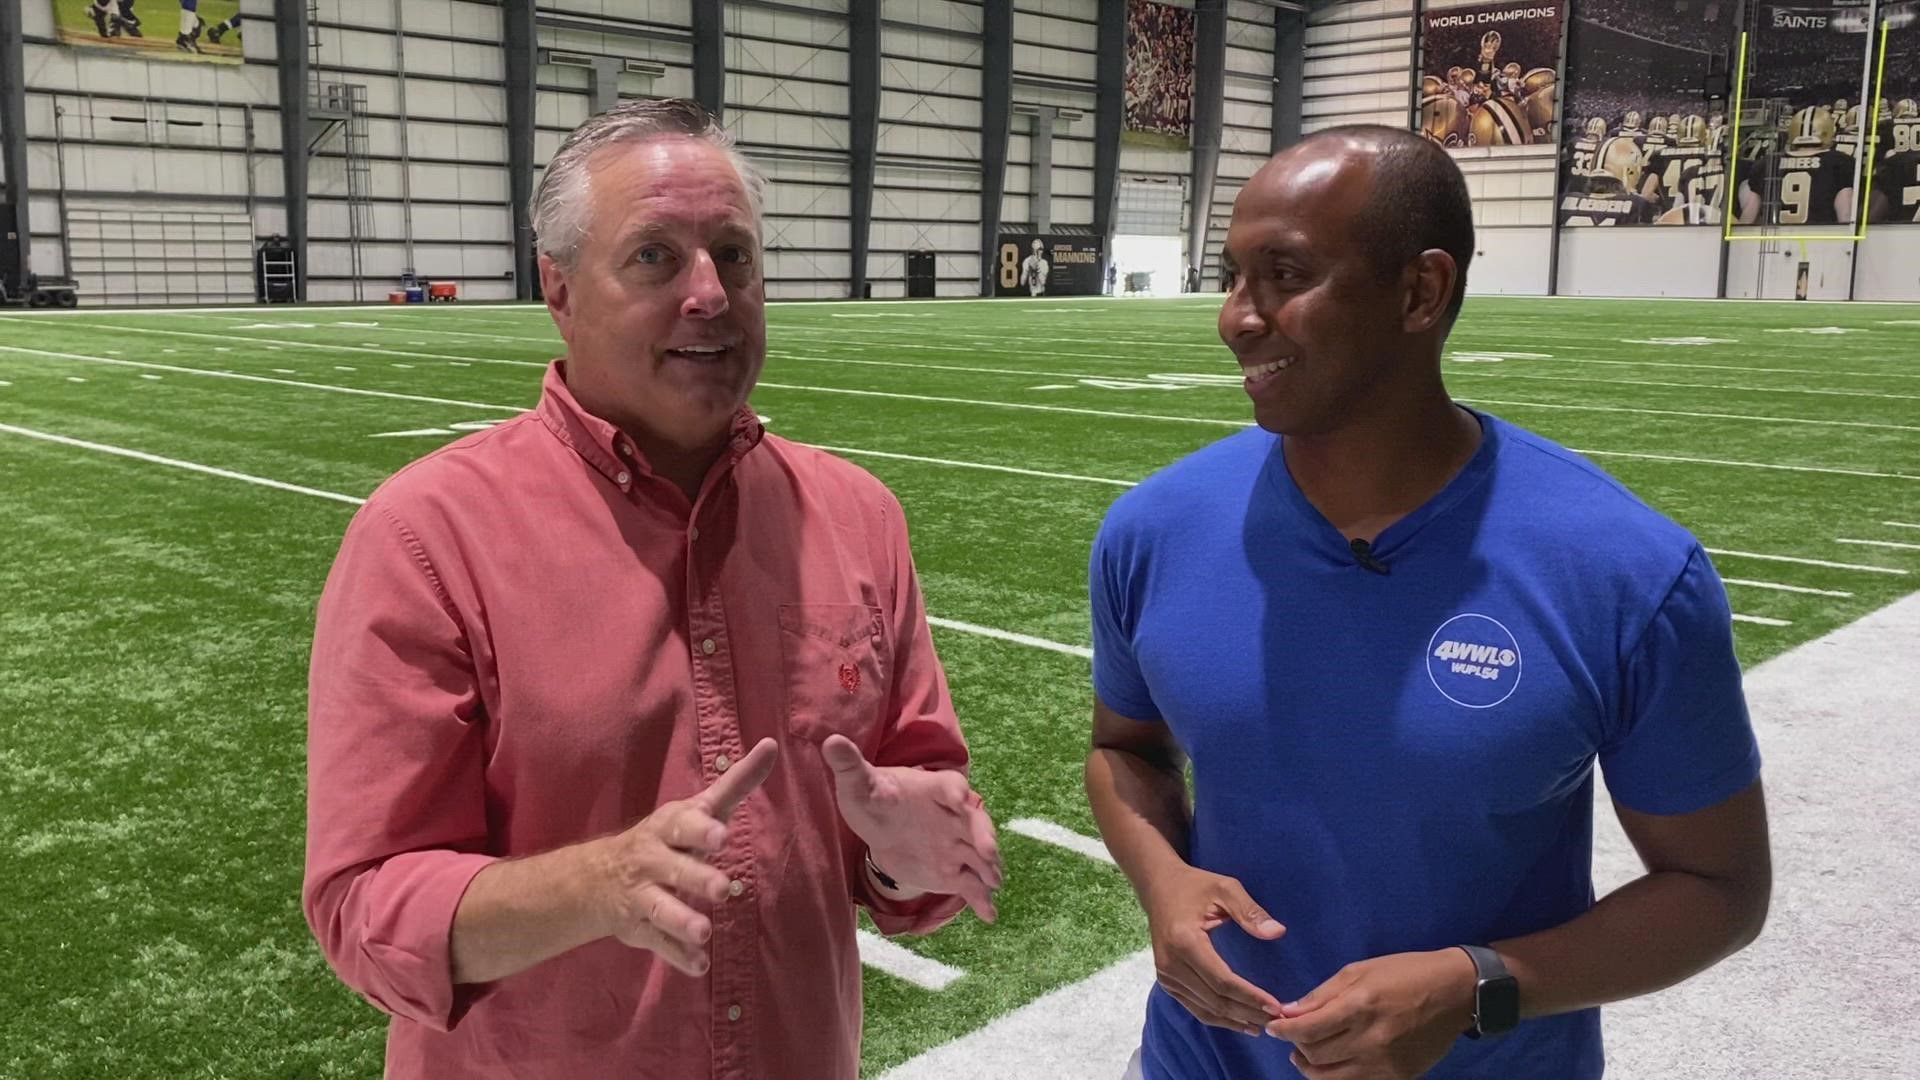 As the Saints open up training camp, WWLTV discusses Michael Thomas and his return to the practice field after missing the 2021 season.